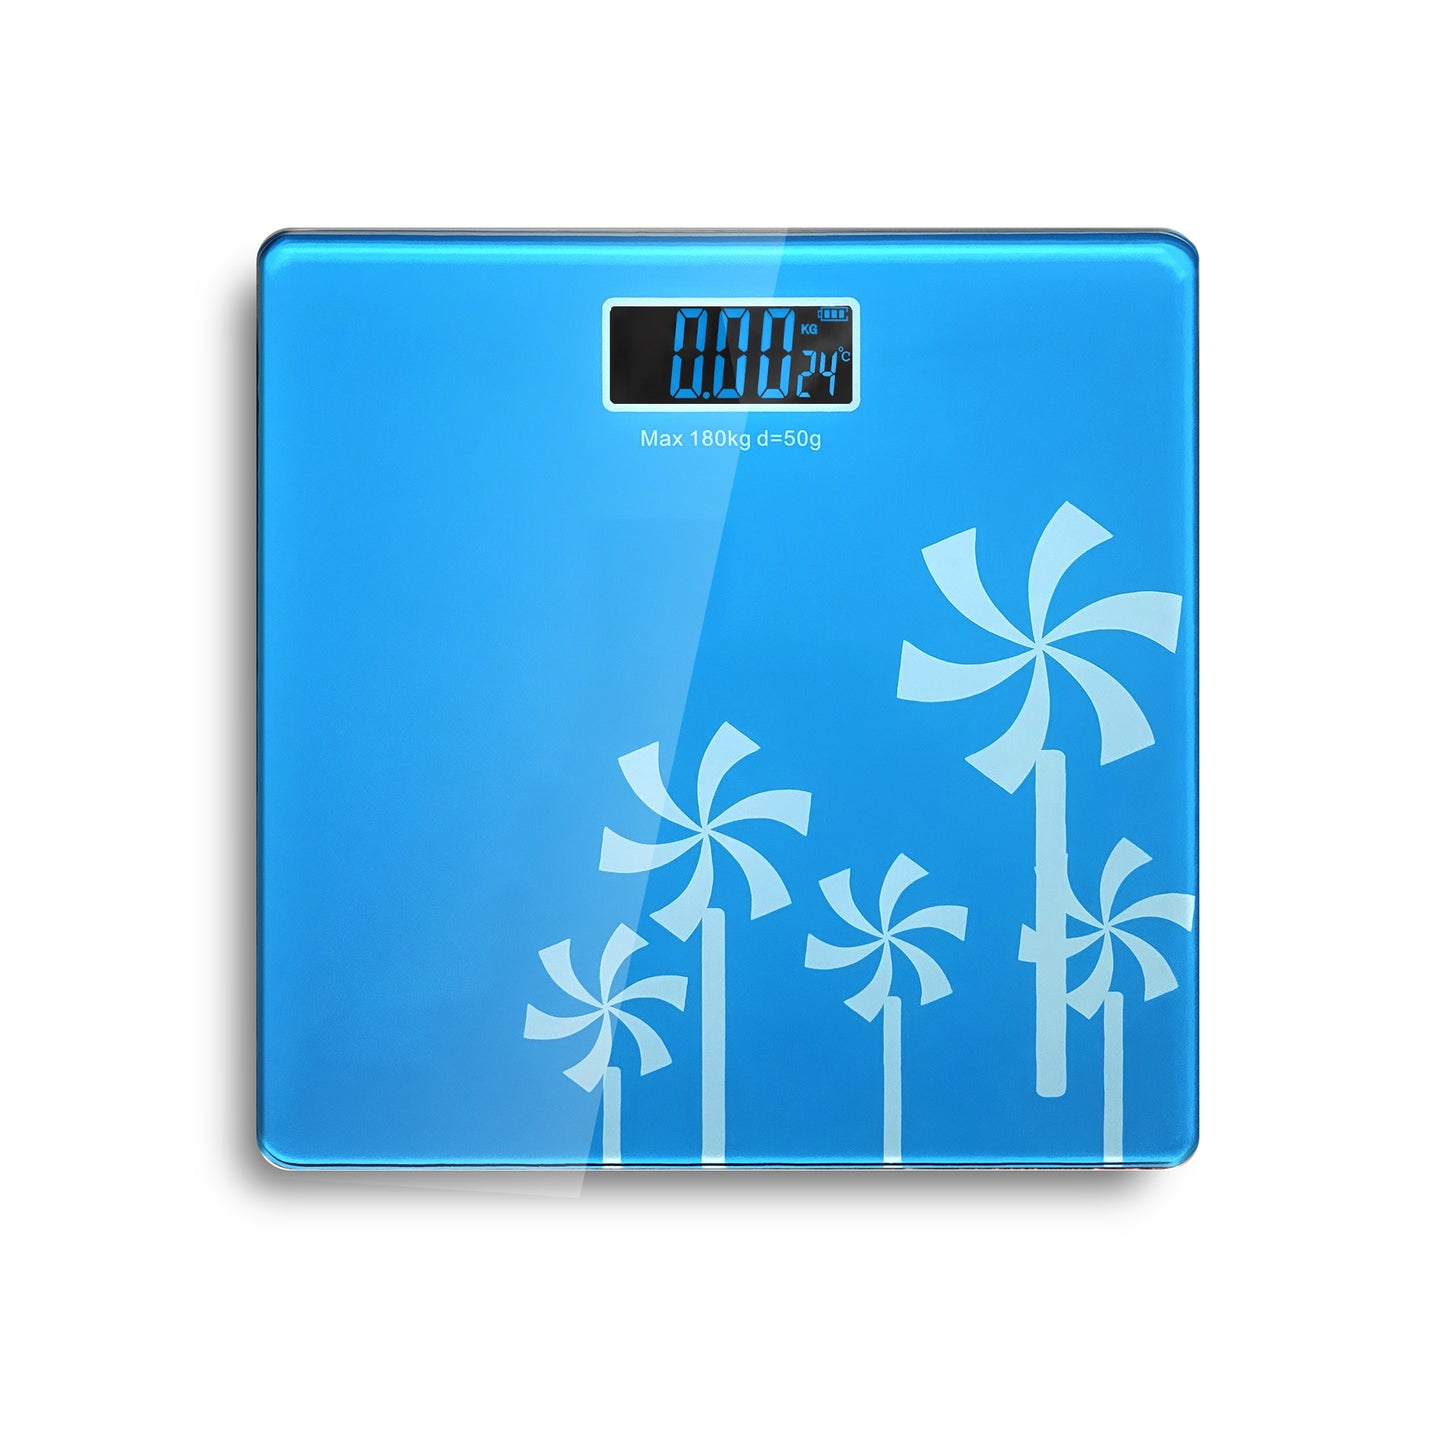 Printed Design Weighing Scale